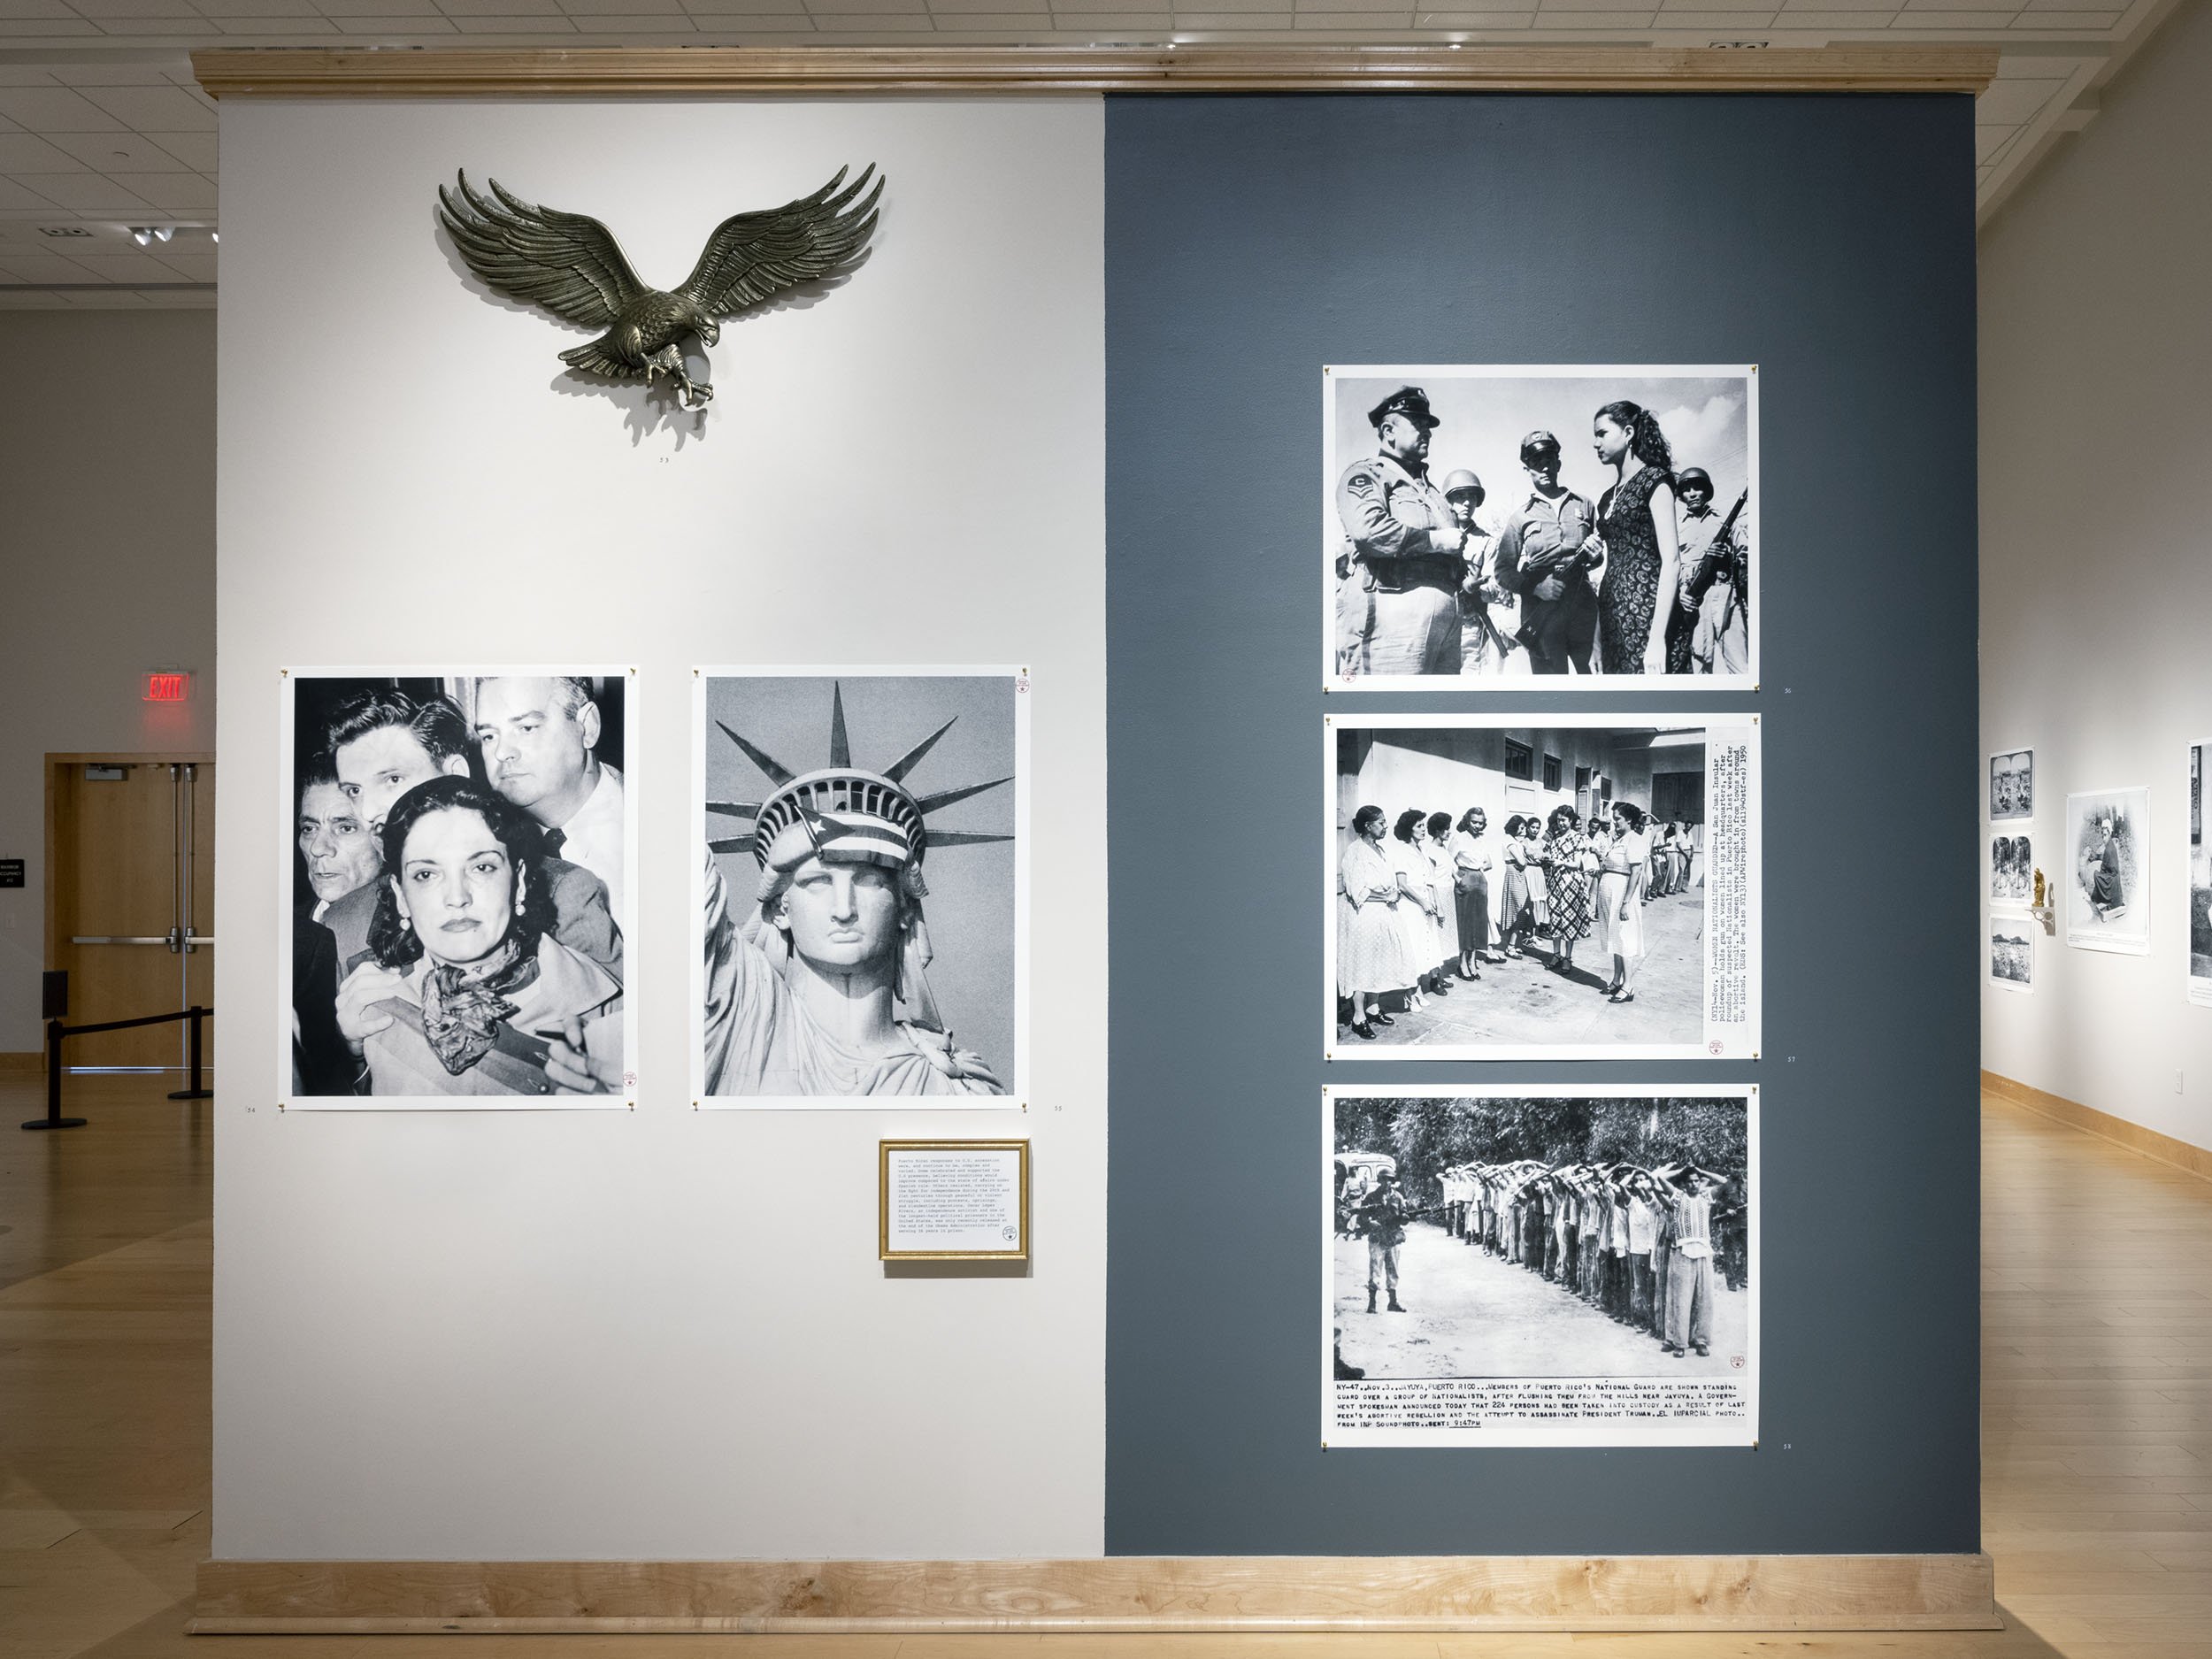  Installation view.  Watchful Eagle ,  Lolita Lebrón Arrested ,  Statue of Liberty with Puerto Rican Flag in 1977 ,   and Puerto Rican Nationalist-related photographs and captions from 1950 | 2019-2021.  The Museum of the Old Colony , Duke Hall Galle